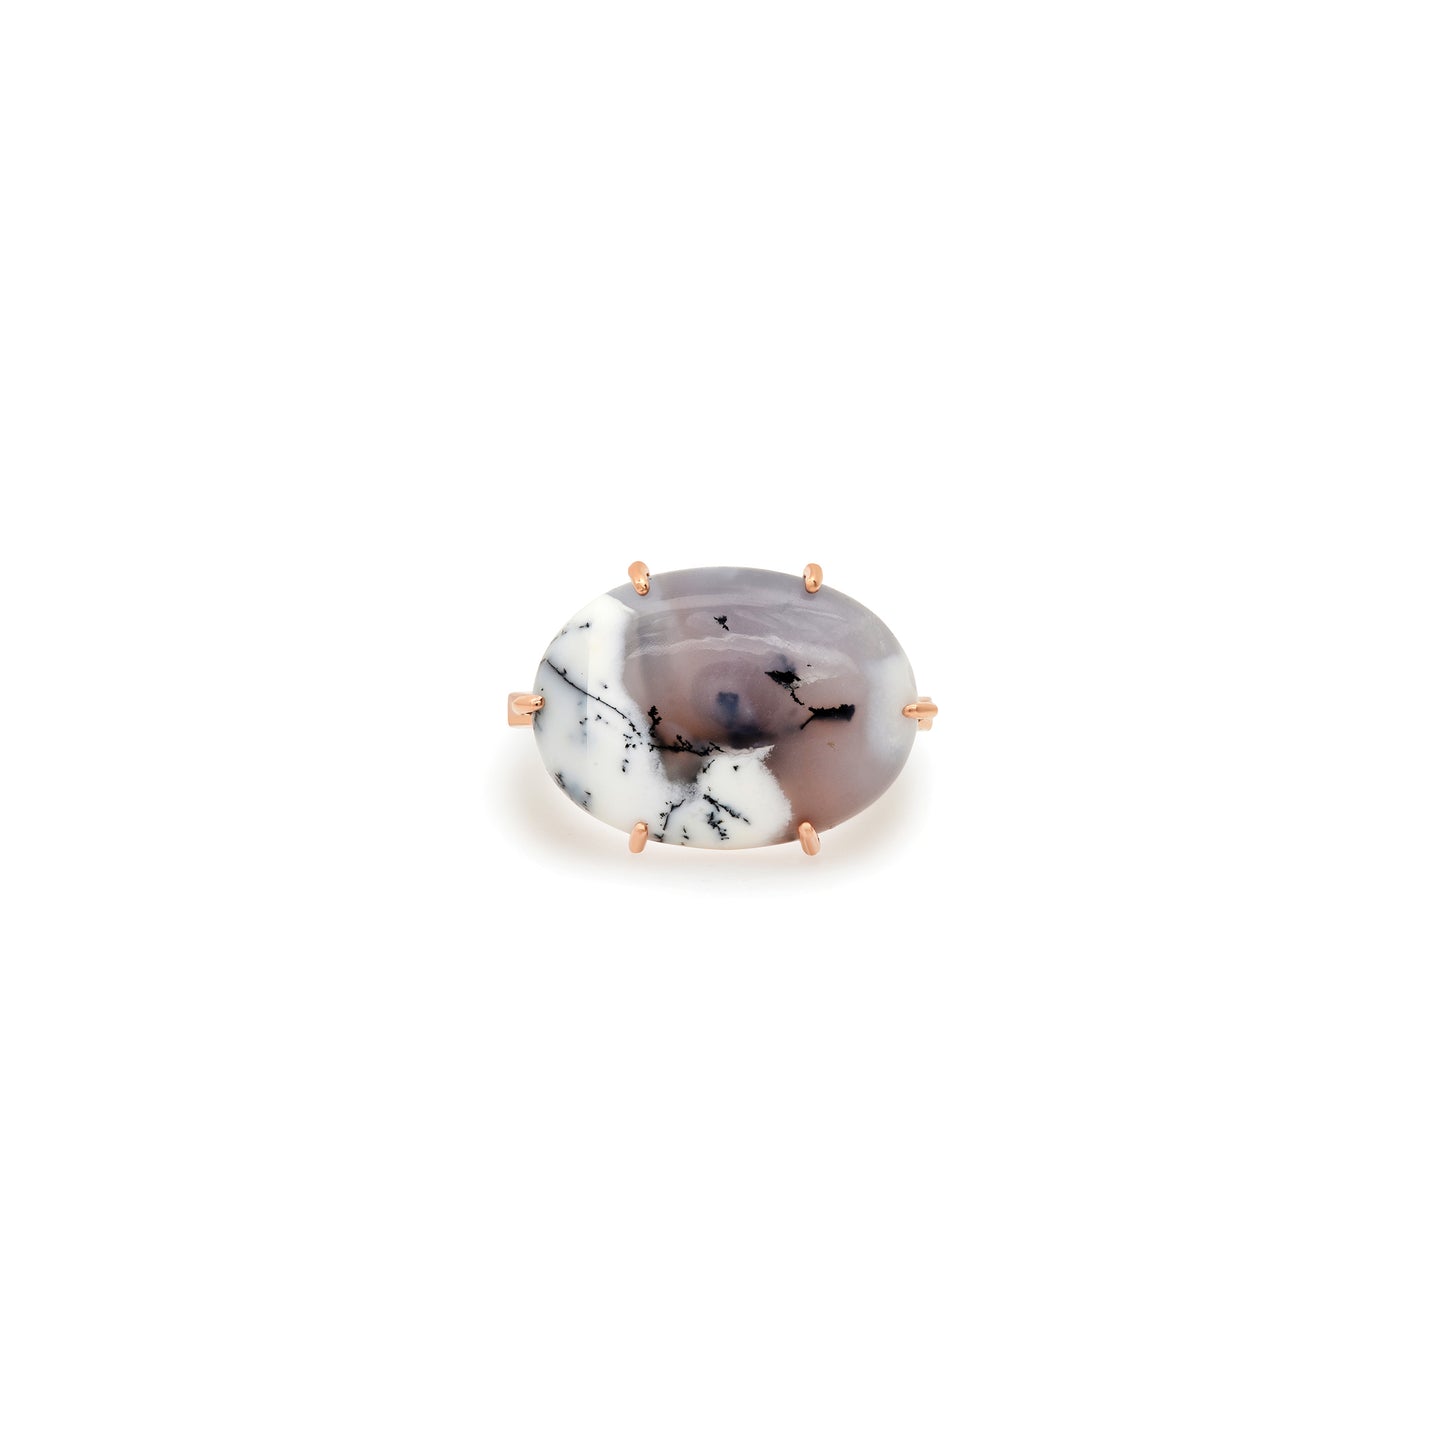 One of a Kind Snowflake Chalcedony Ring